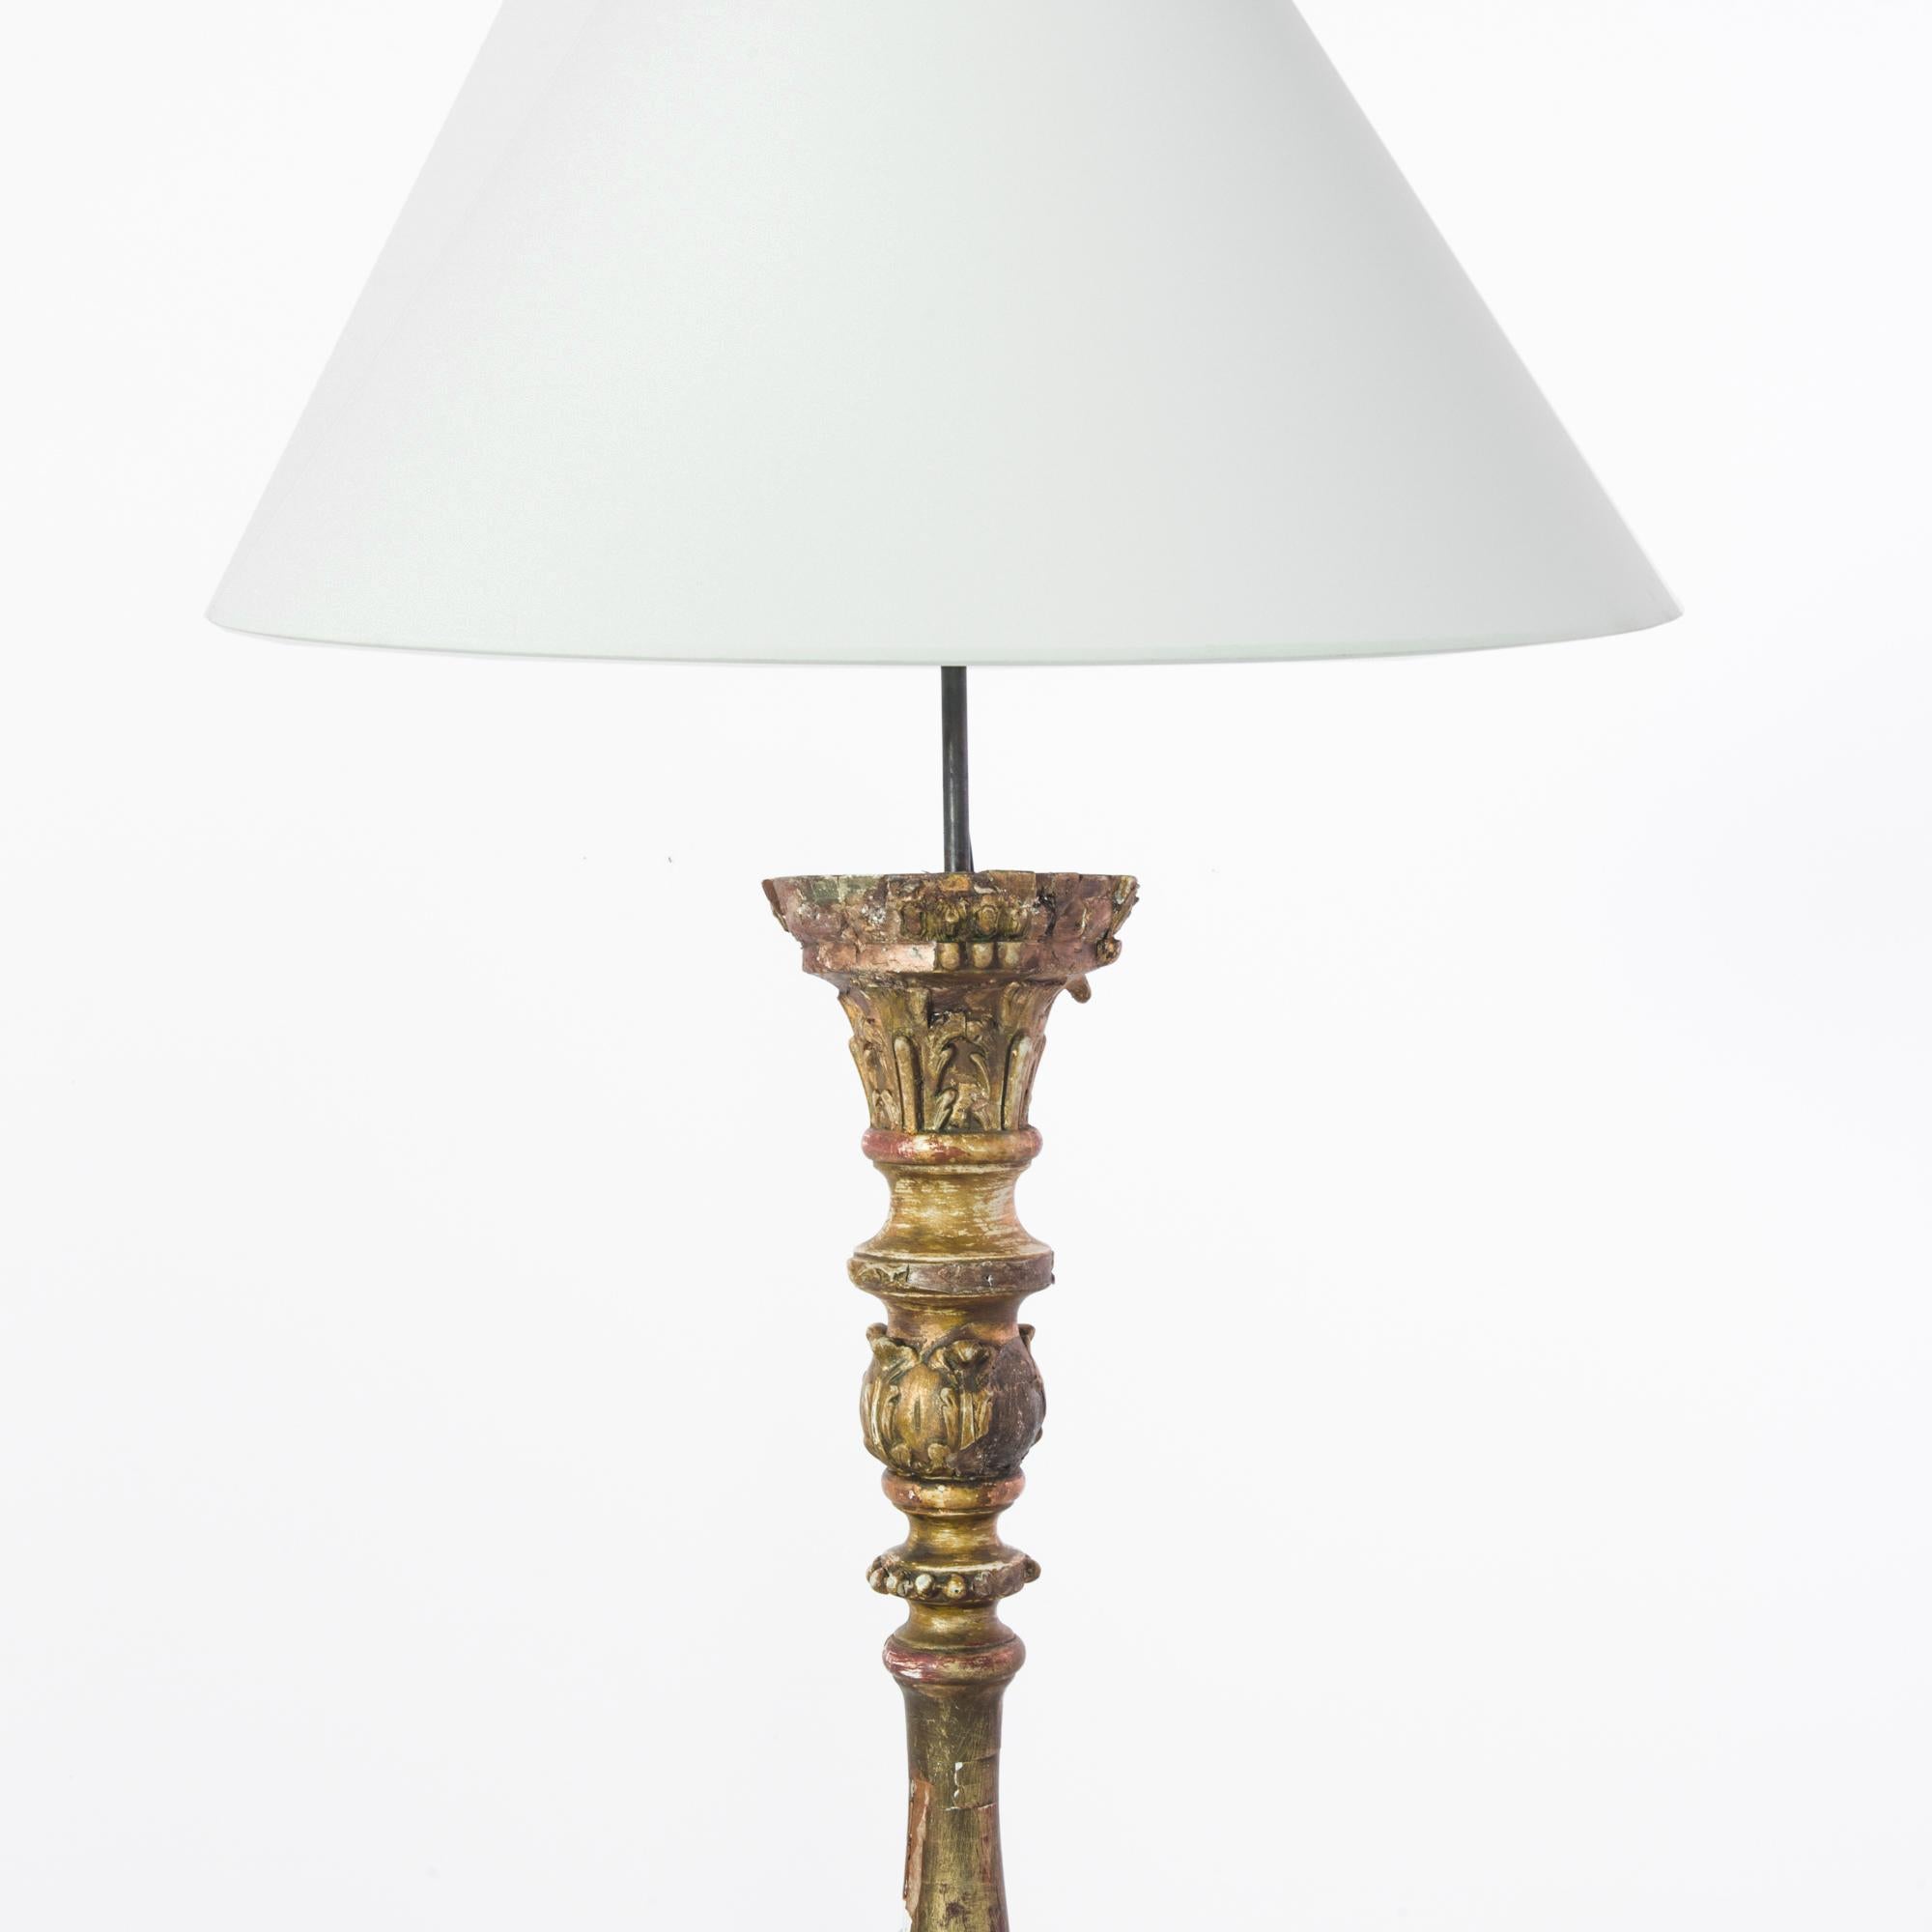 A wood patinated floor lamp produced in France circa 1850. A gilded stalk, covered in bountiful leaf carvings, standing on three toes, rises to a height of six and a half feet capped by a white lamp shade. This striking antique is sure to enshrine